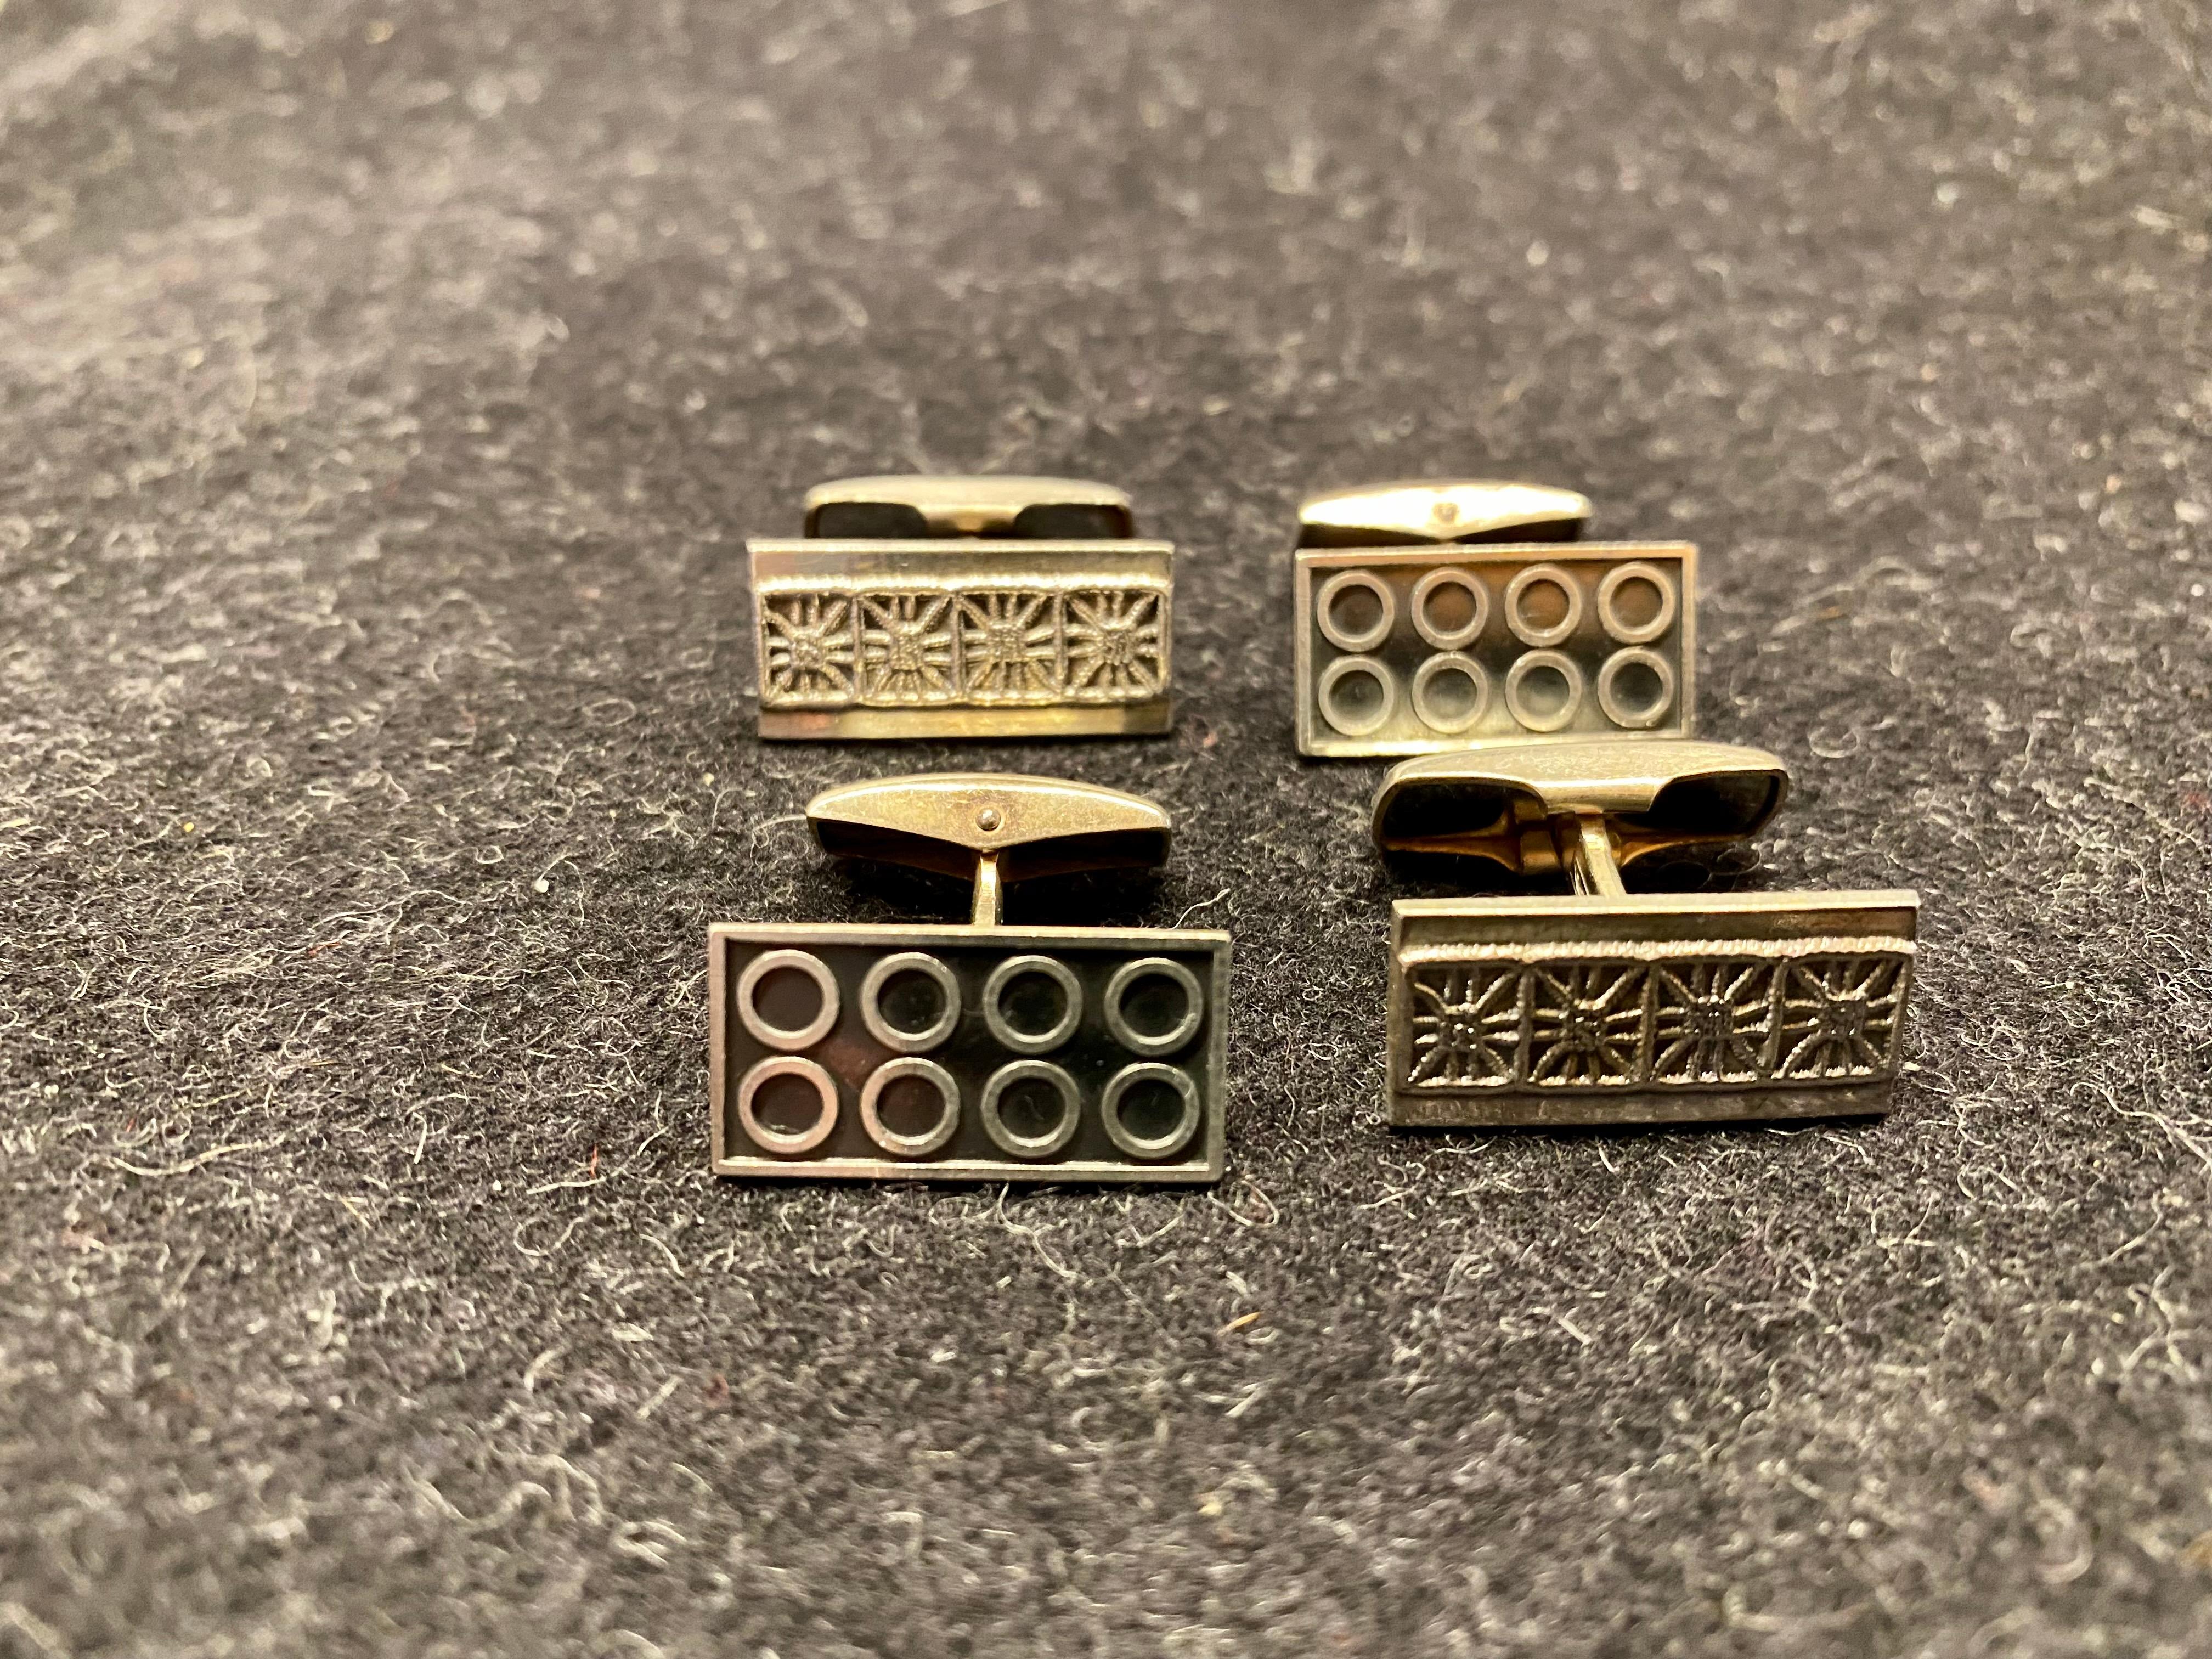 Silver Cufflinks Finland 1964 and 1969
Helsinki	Rauno Oma Mättö	ROM	1957-1998
813H and 830H Silver
2cm 
engravings.
Great Cufflinks
See more, we have several Cufflinks for sale.